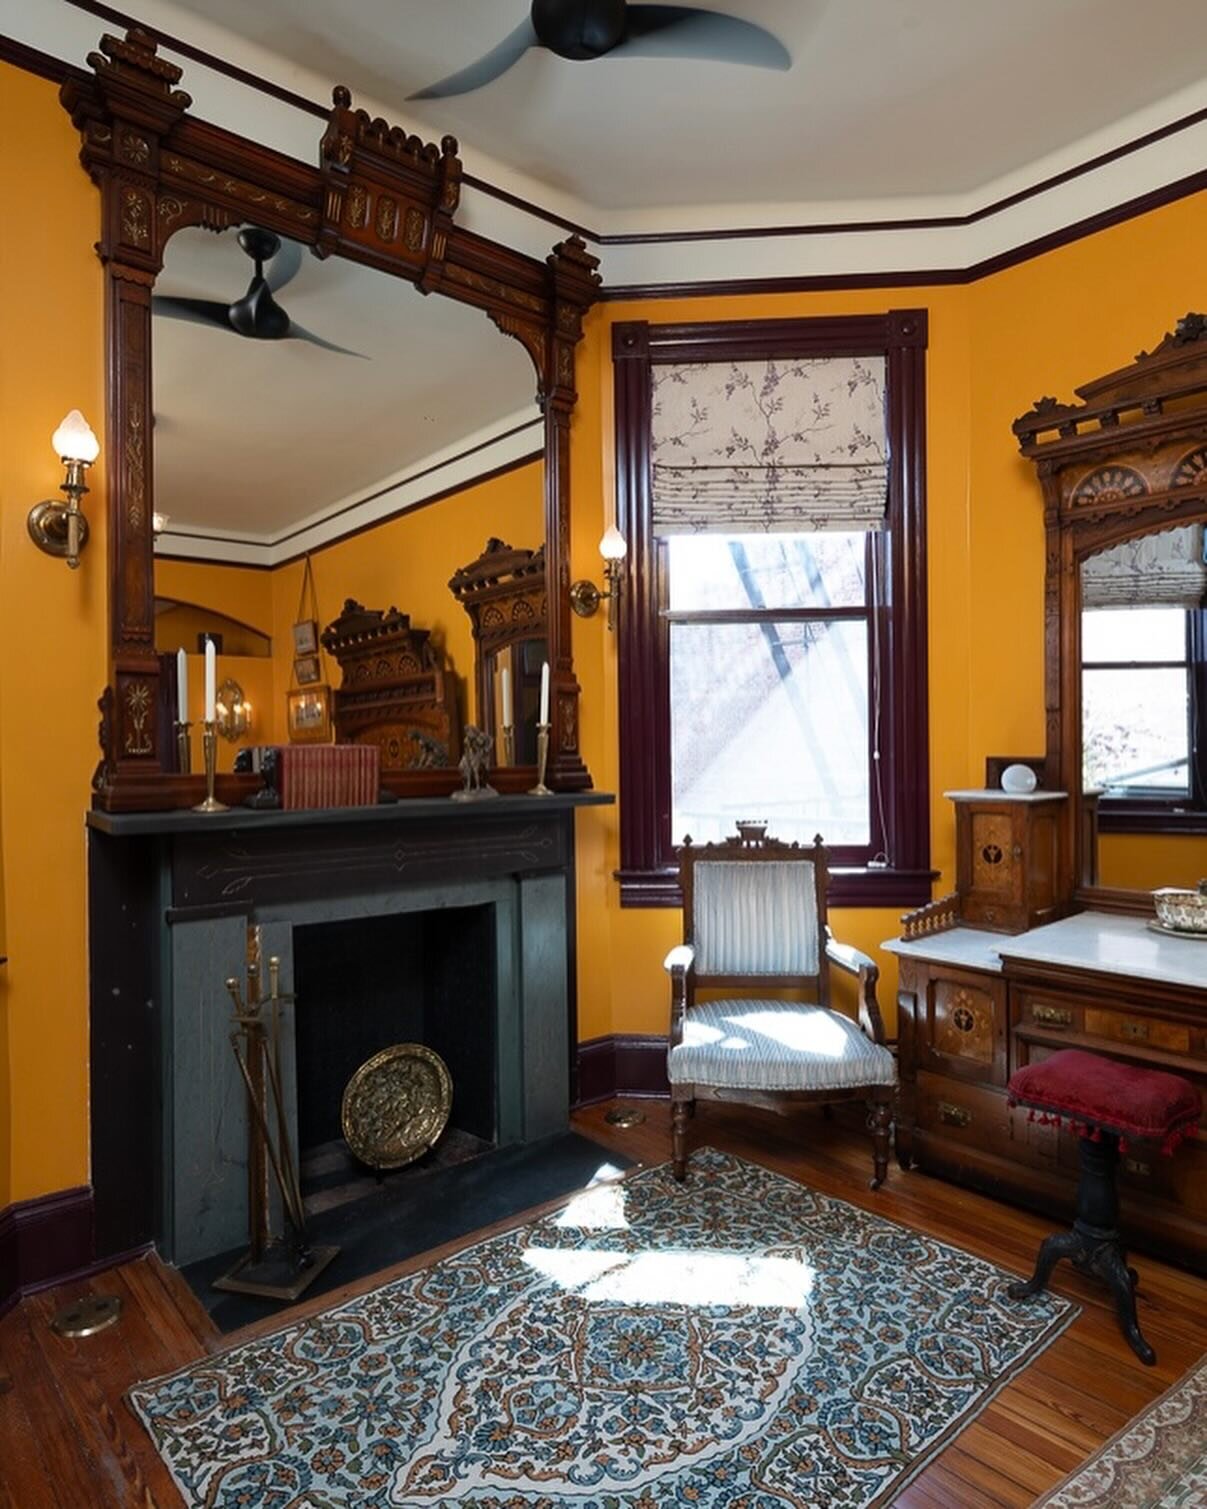 We were thrilled to win the Baltimore Magazine Home &amp; Design award for Best Fireplace at the Calvert Street Residence!  The extensive renovation of this brownstone built in 1883 included the restoration of 8 original fireplaces and mantels throug